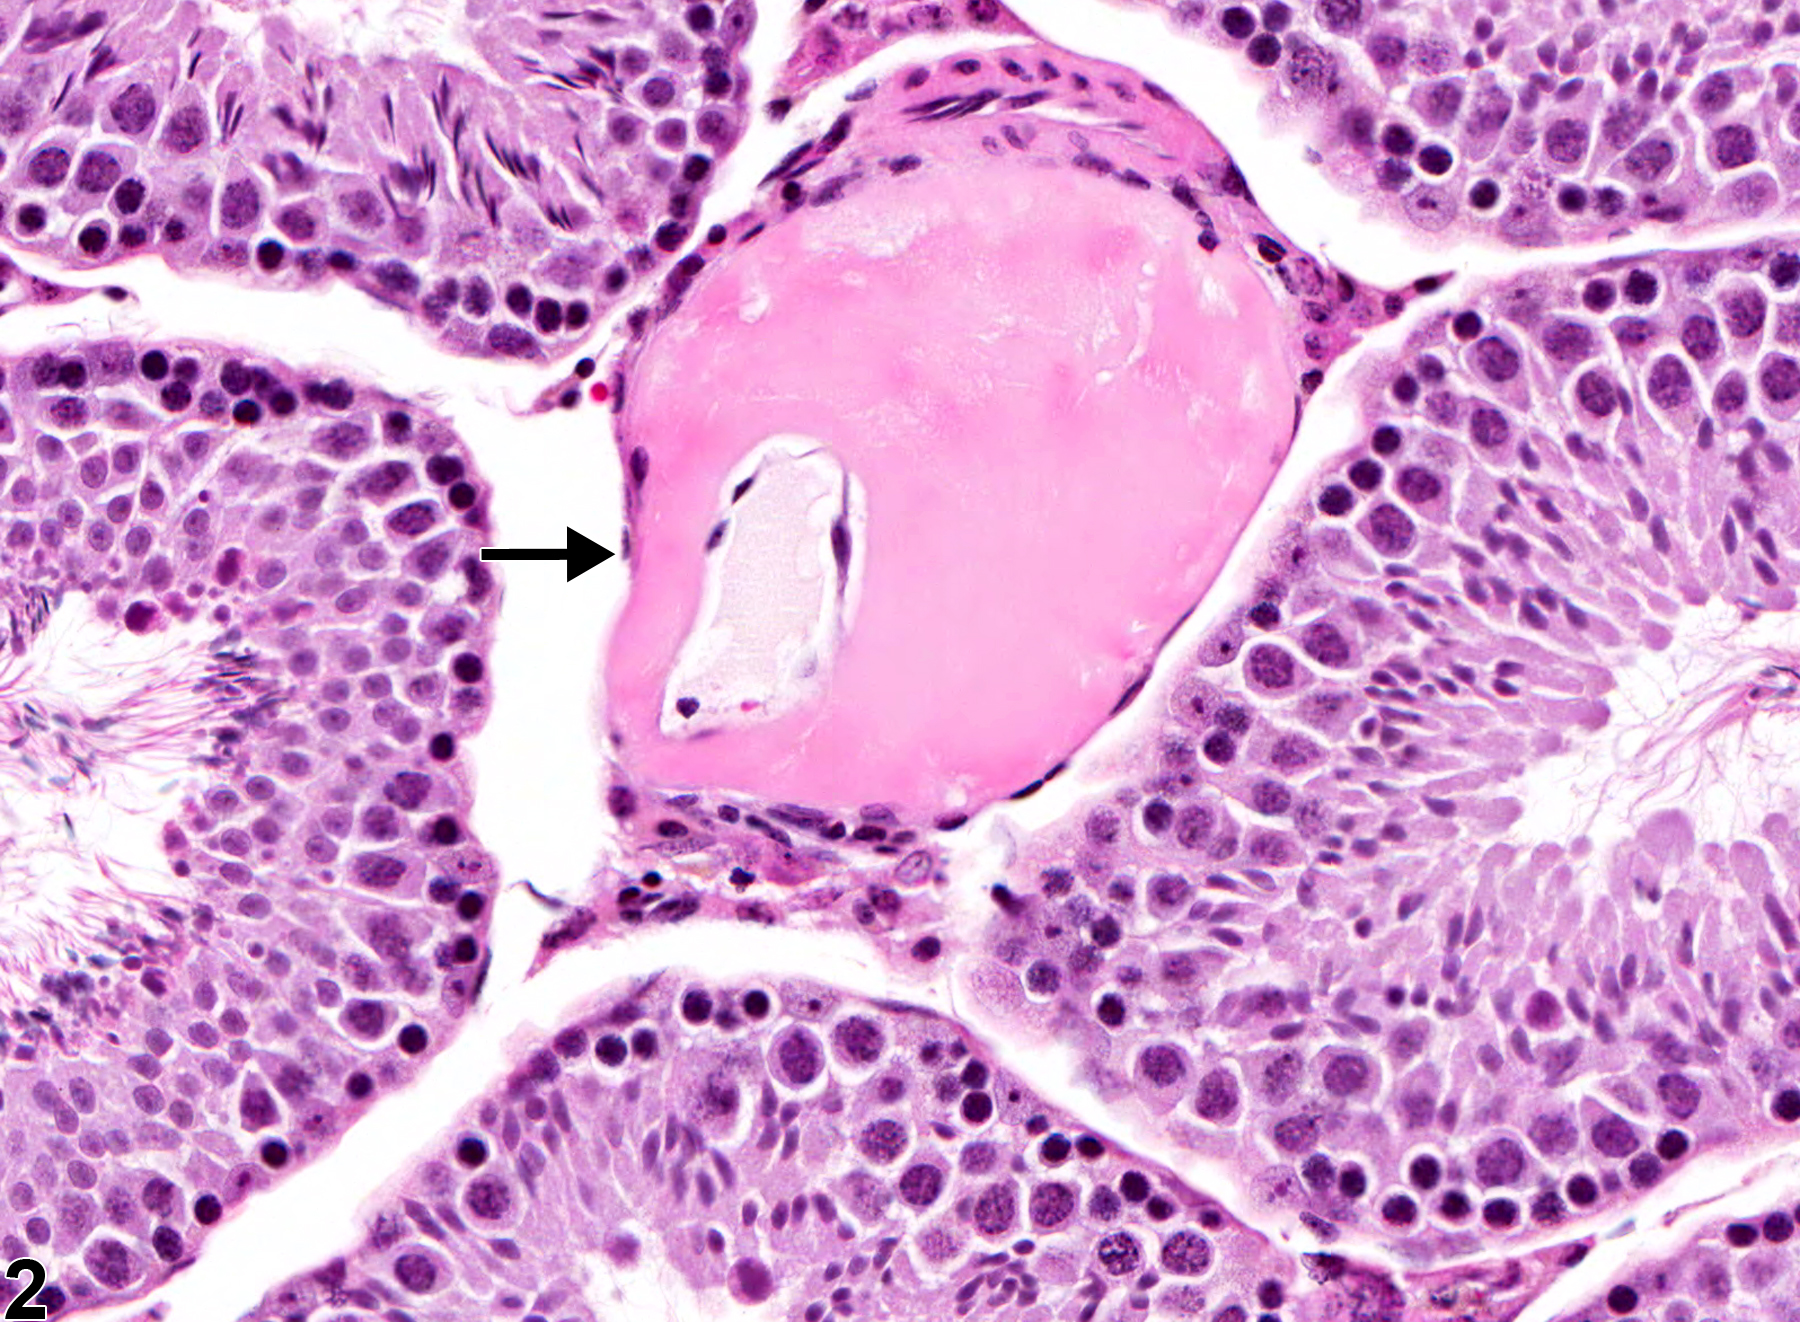 Image of amyloid in the testis from a male B6C3F1 mouse in a chronic study